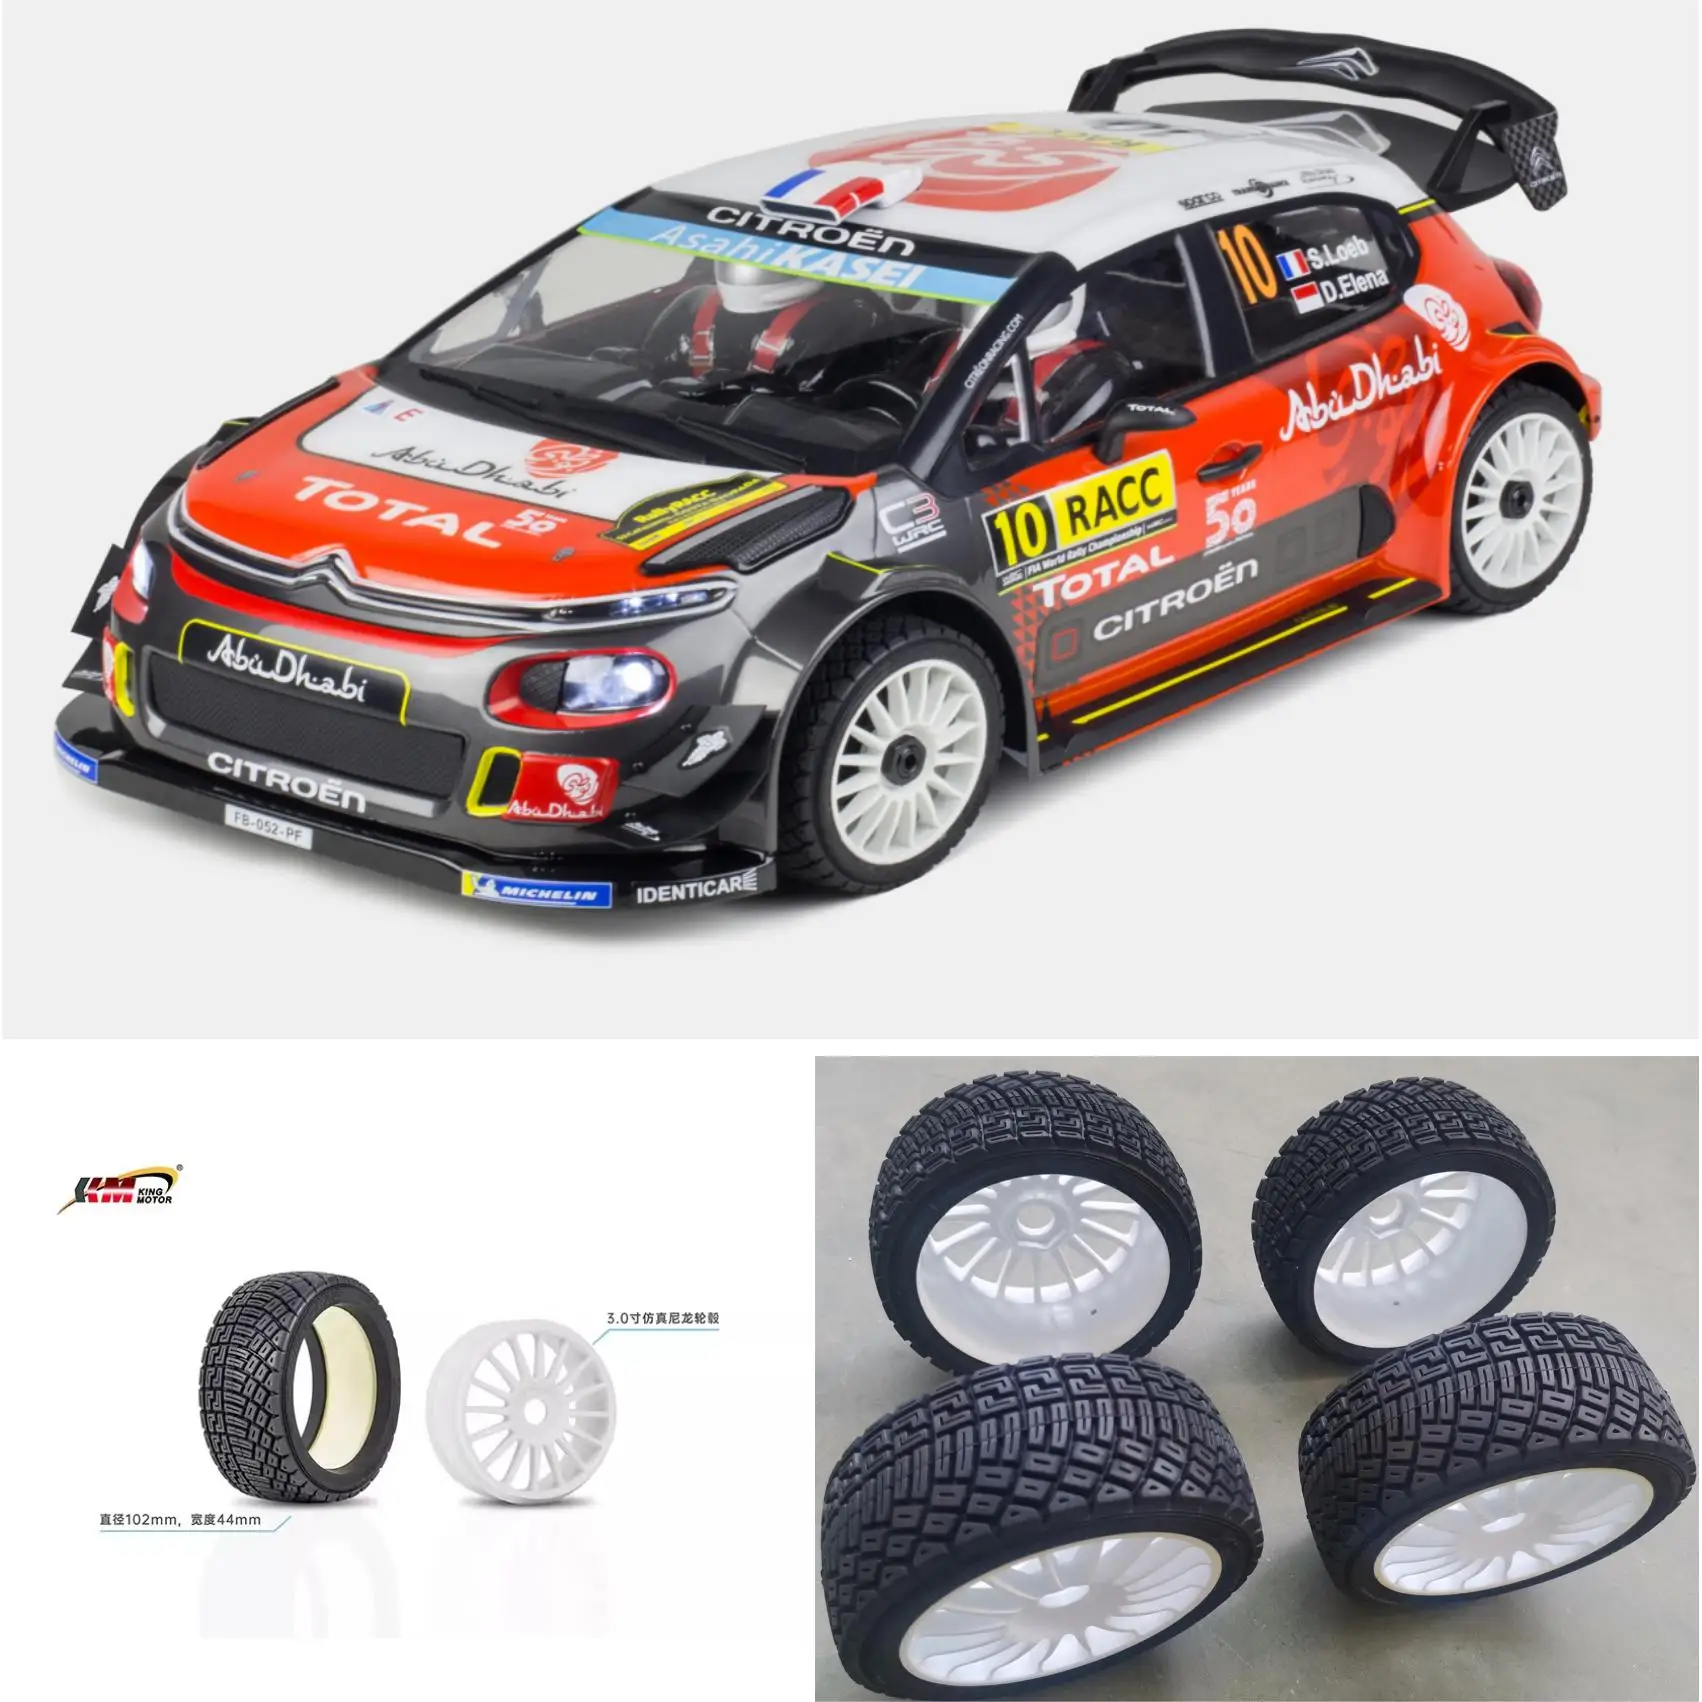 

1/7 C3 Racing Car, 1/7 Scale RC Sports Car, Citroën WRC C3 Rally Car, Licensed Racing Vehicles, Brushless RC Off Road Models